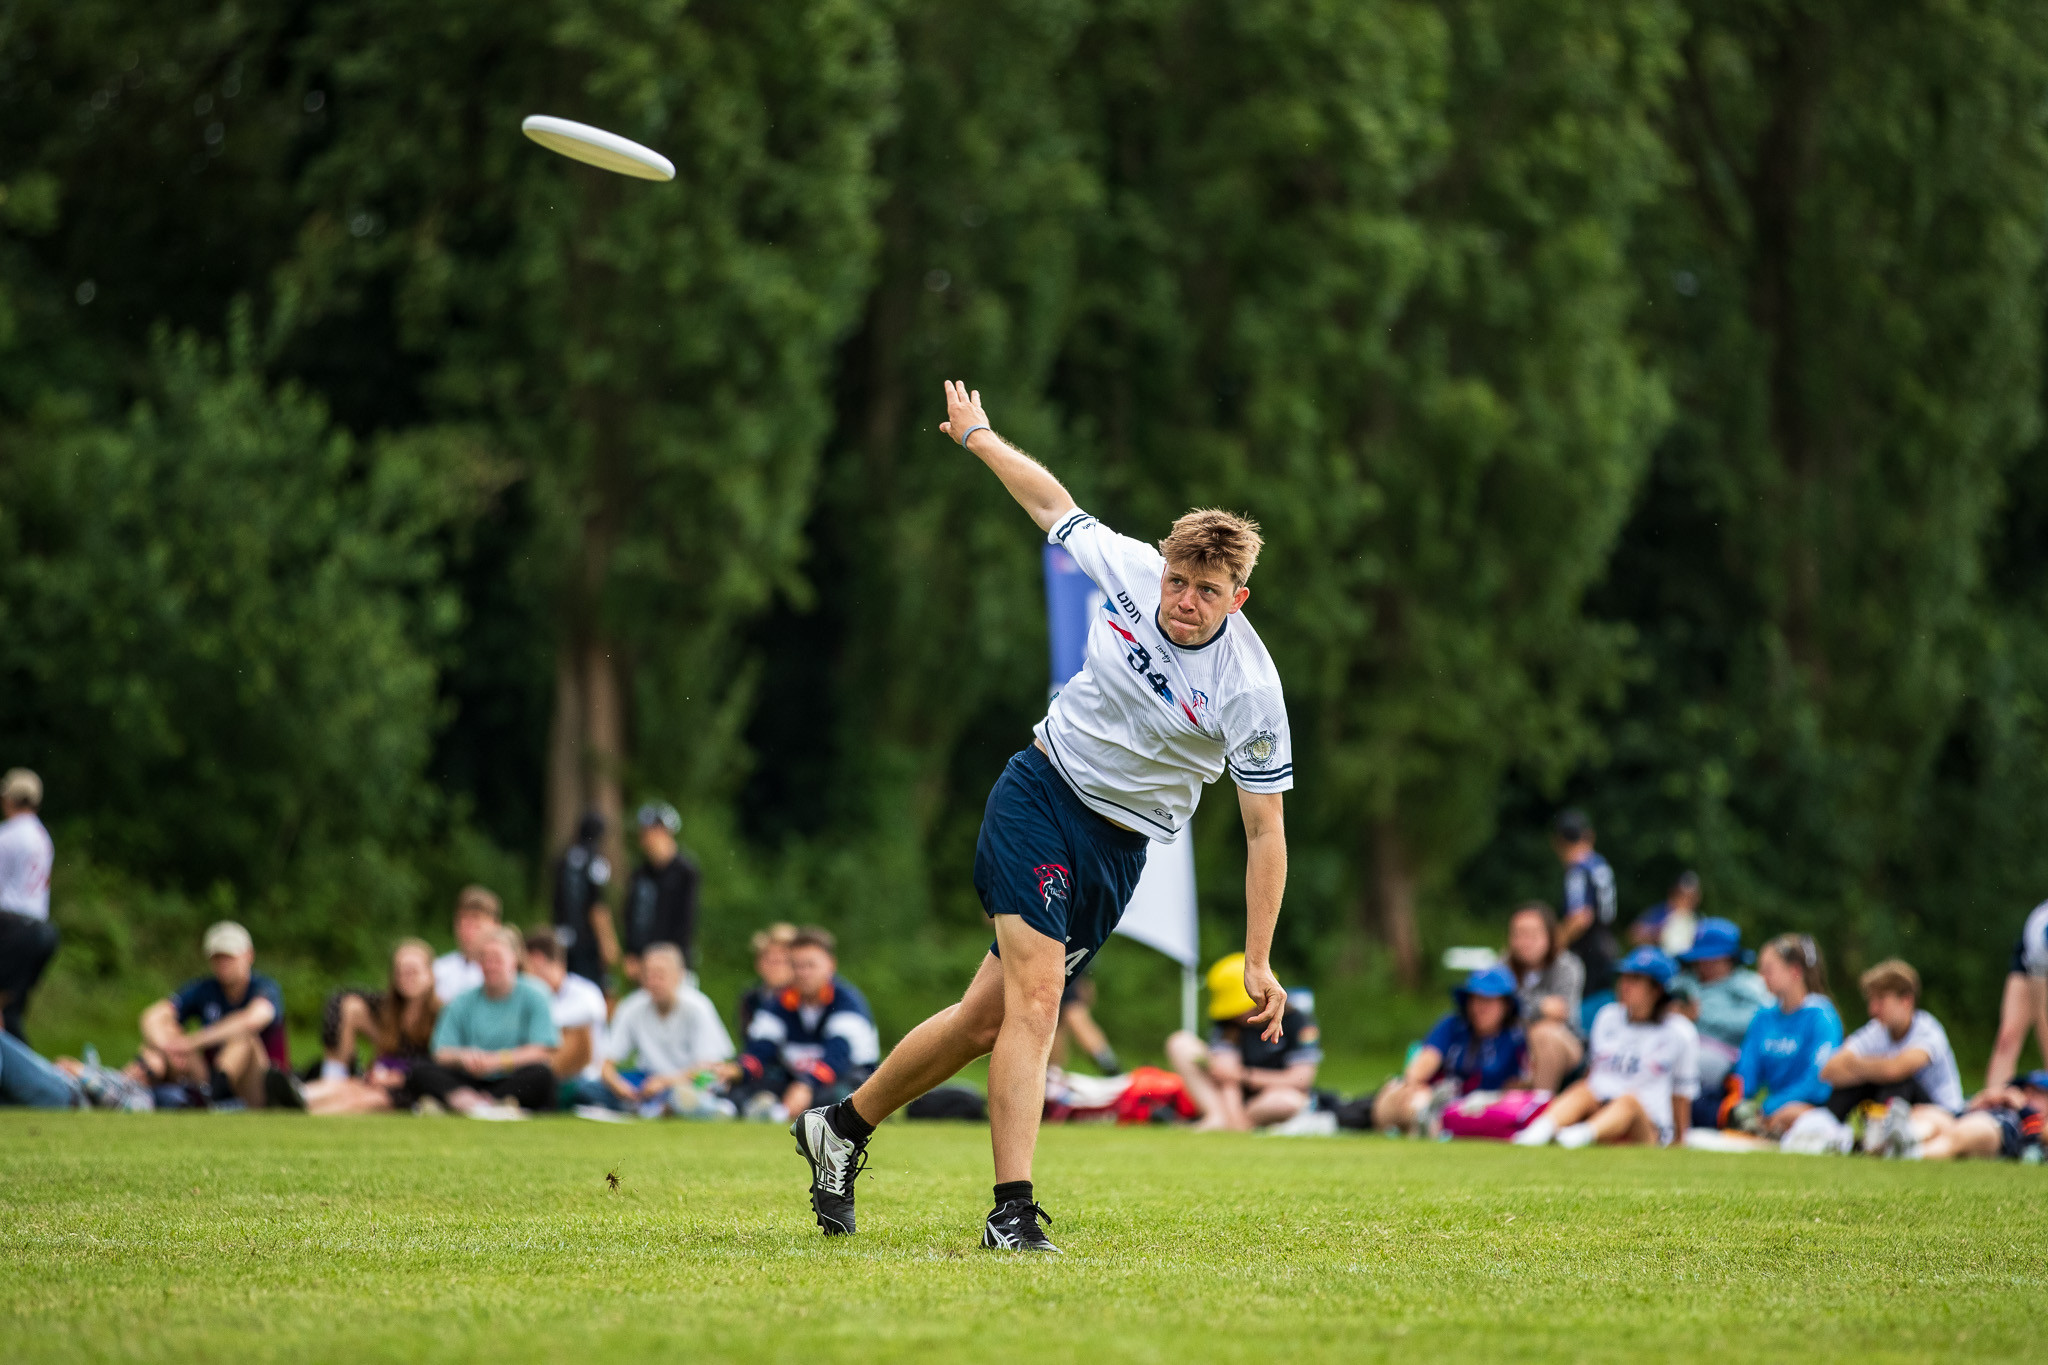 Hosts Britain finished sixth in the mixed tournament at the WFDF World Under-24 Ultimate Championships ©WFDF